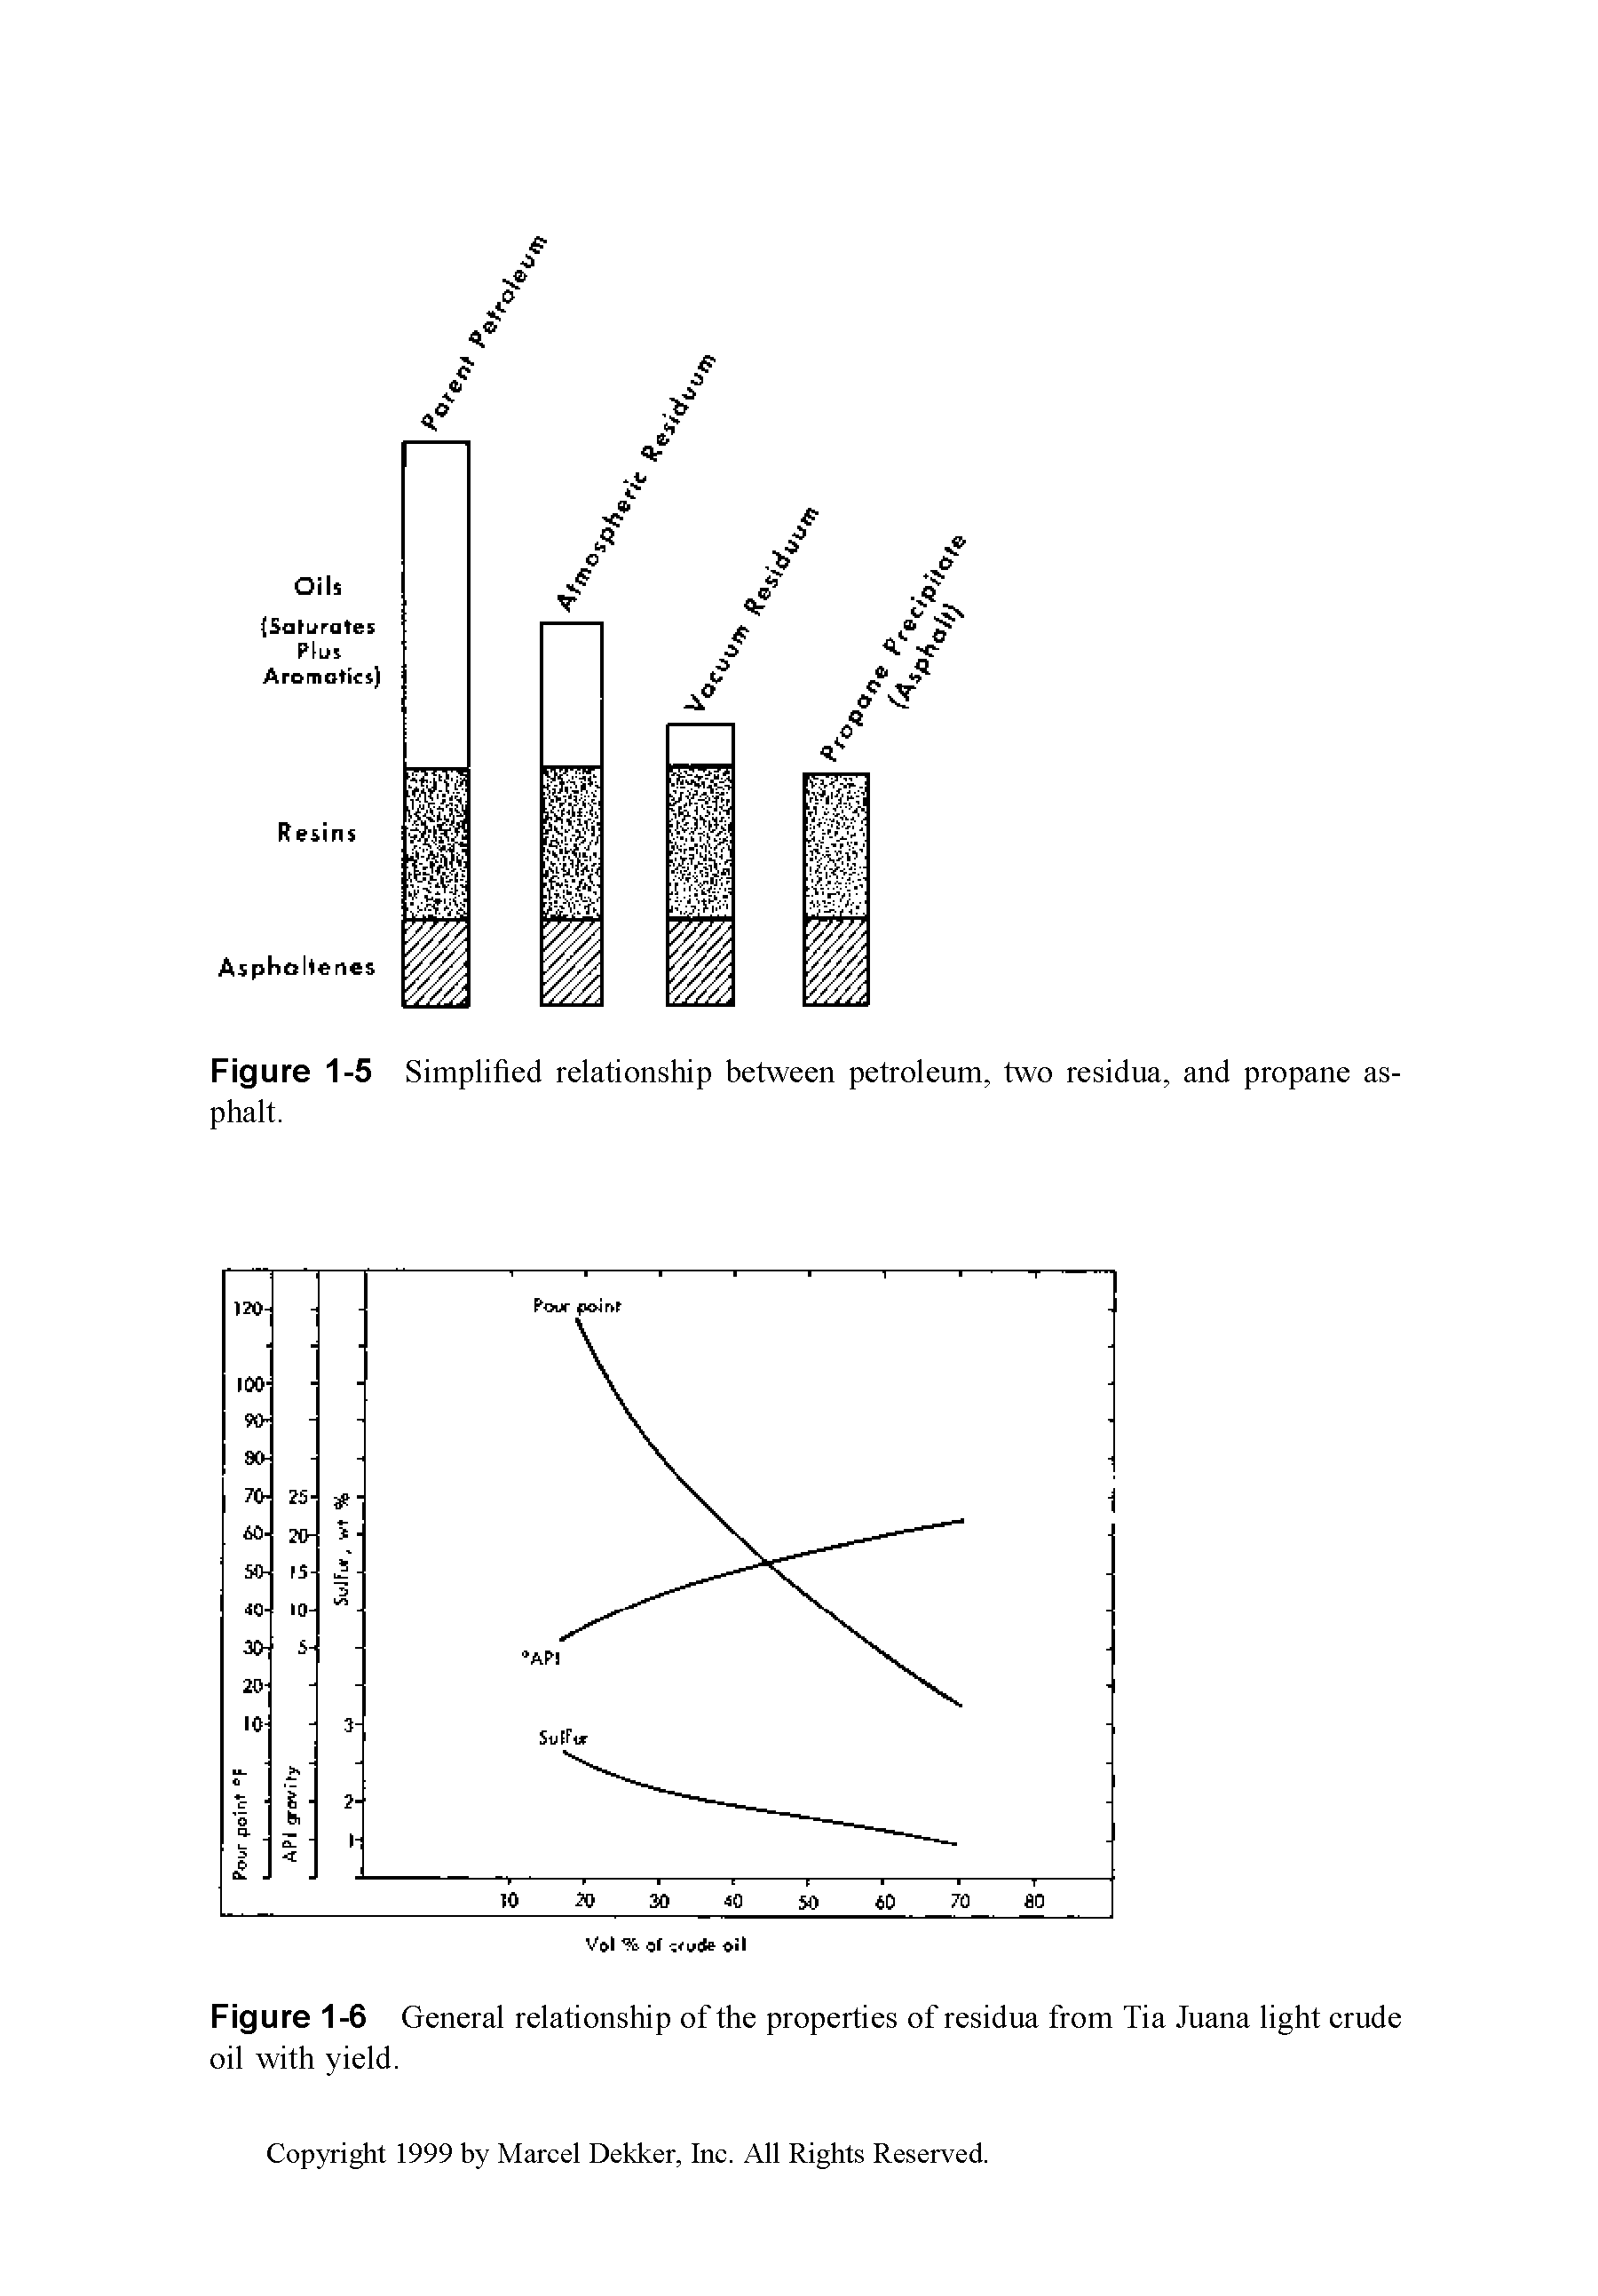 Figure 1 -6 General relationship of the properties of residua from Tia Juana light crude oil with yield.